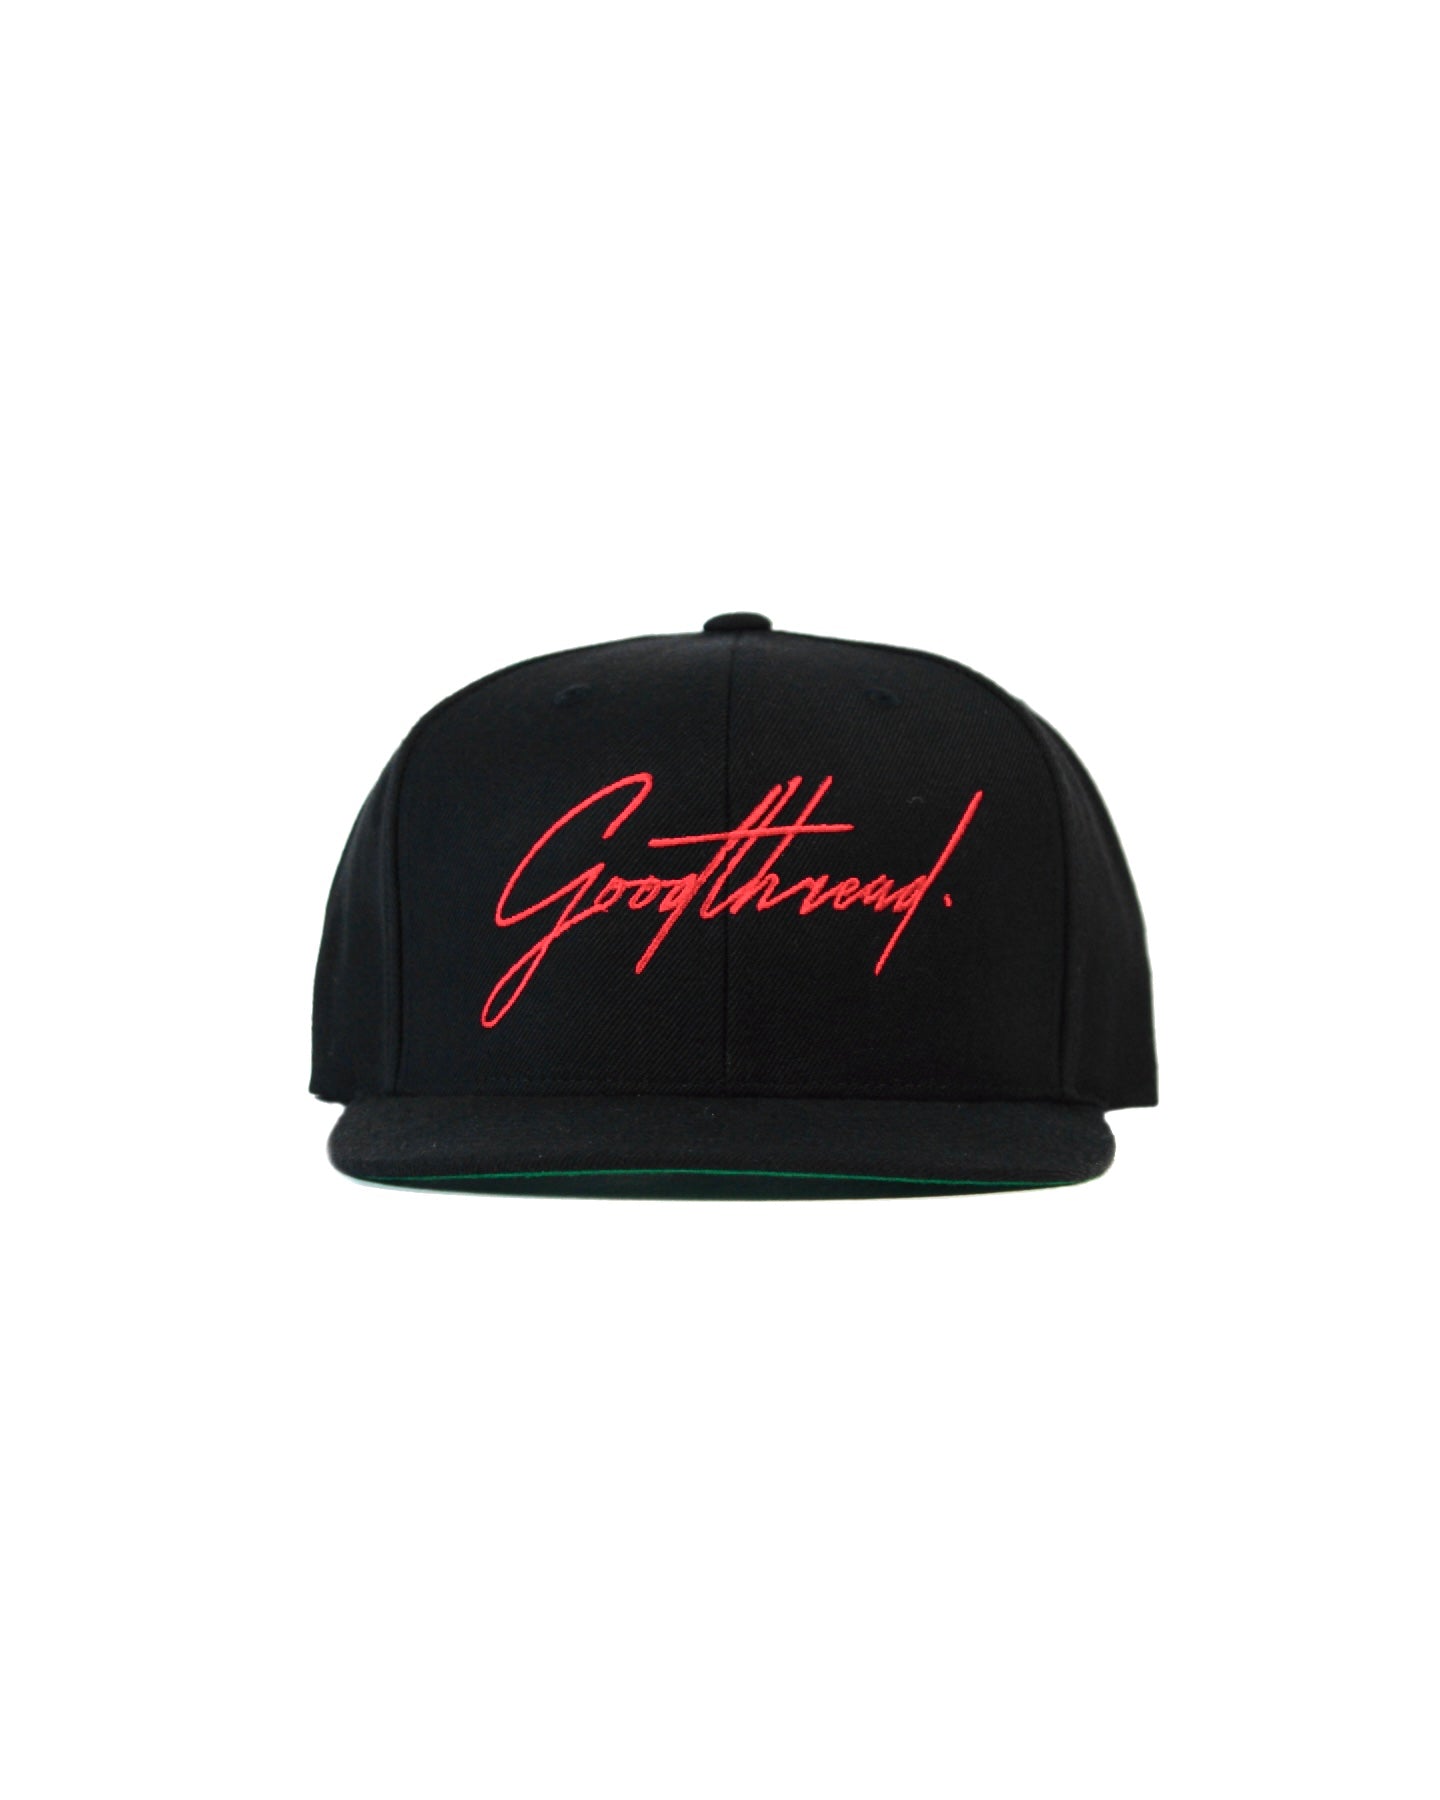 Embroidered Snapback Black/Red